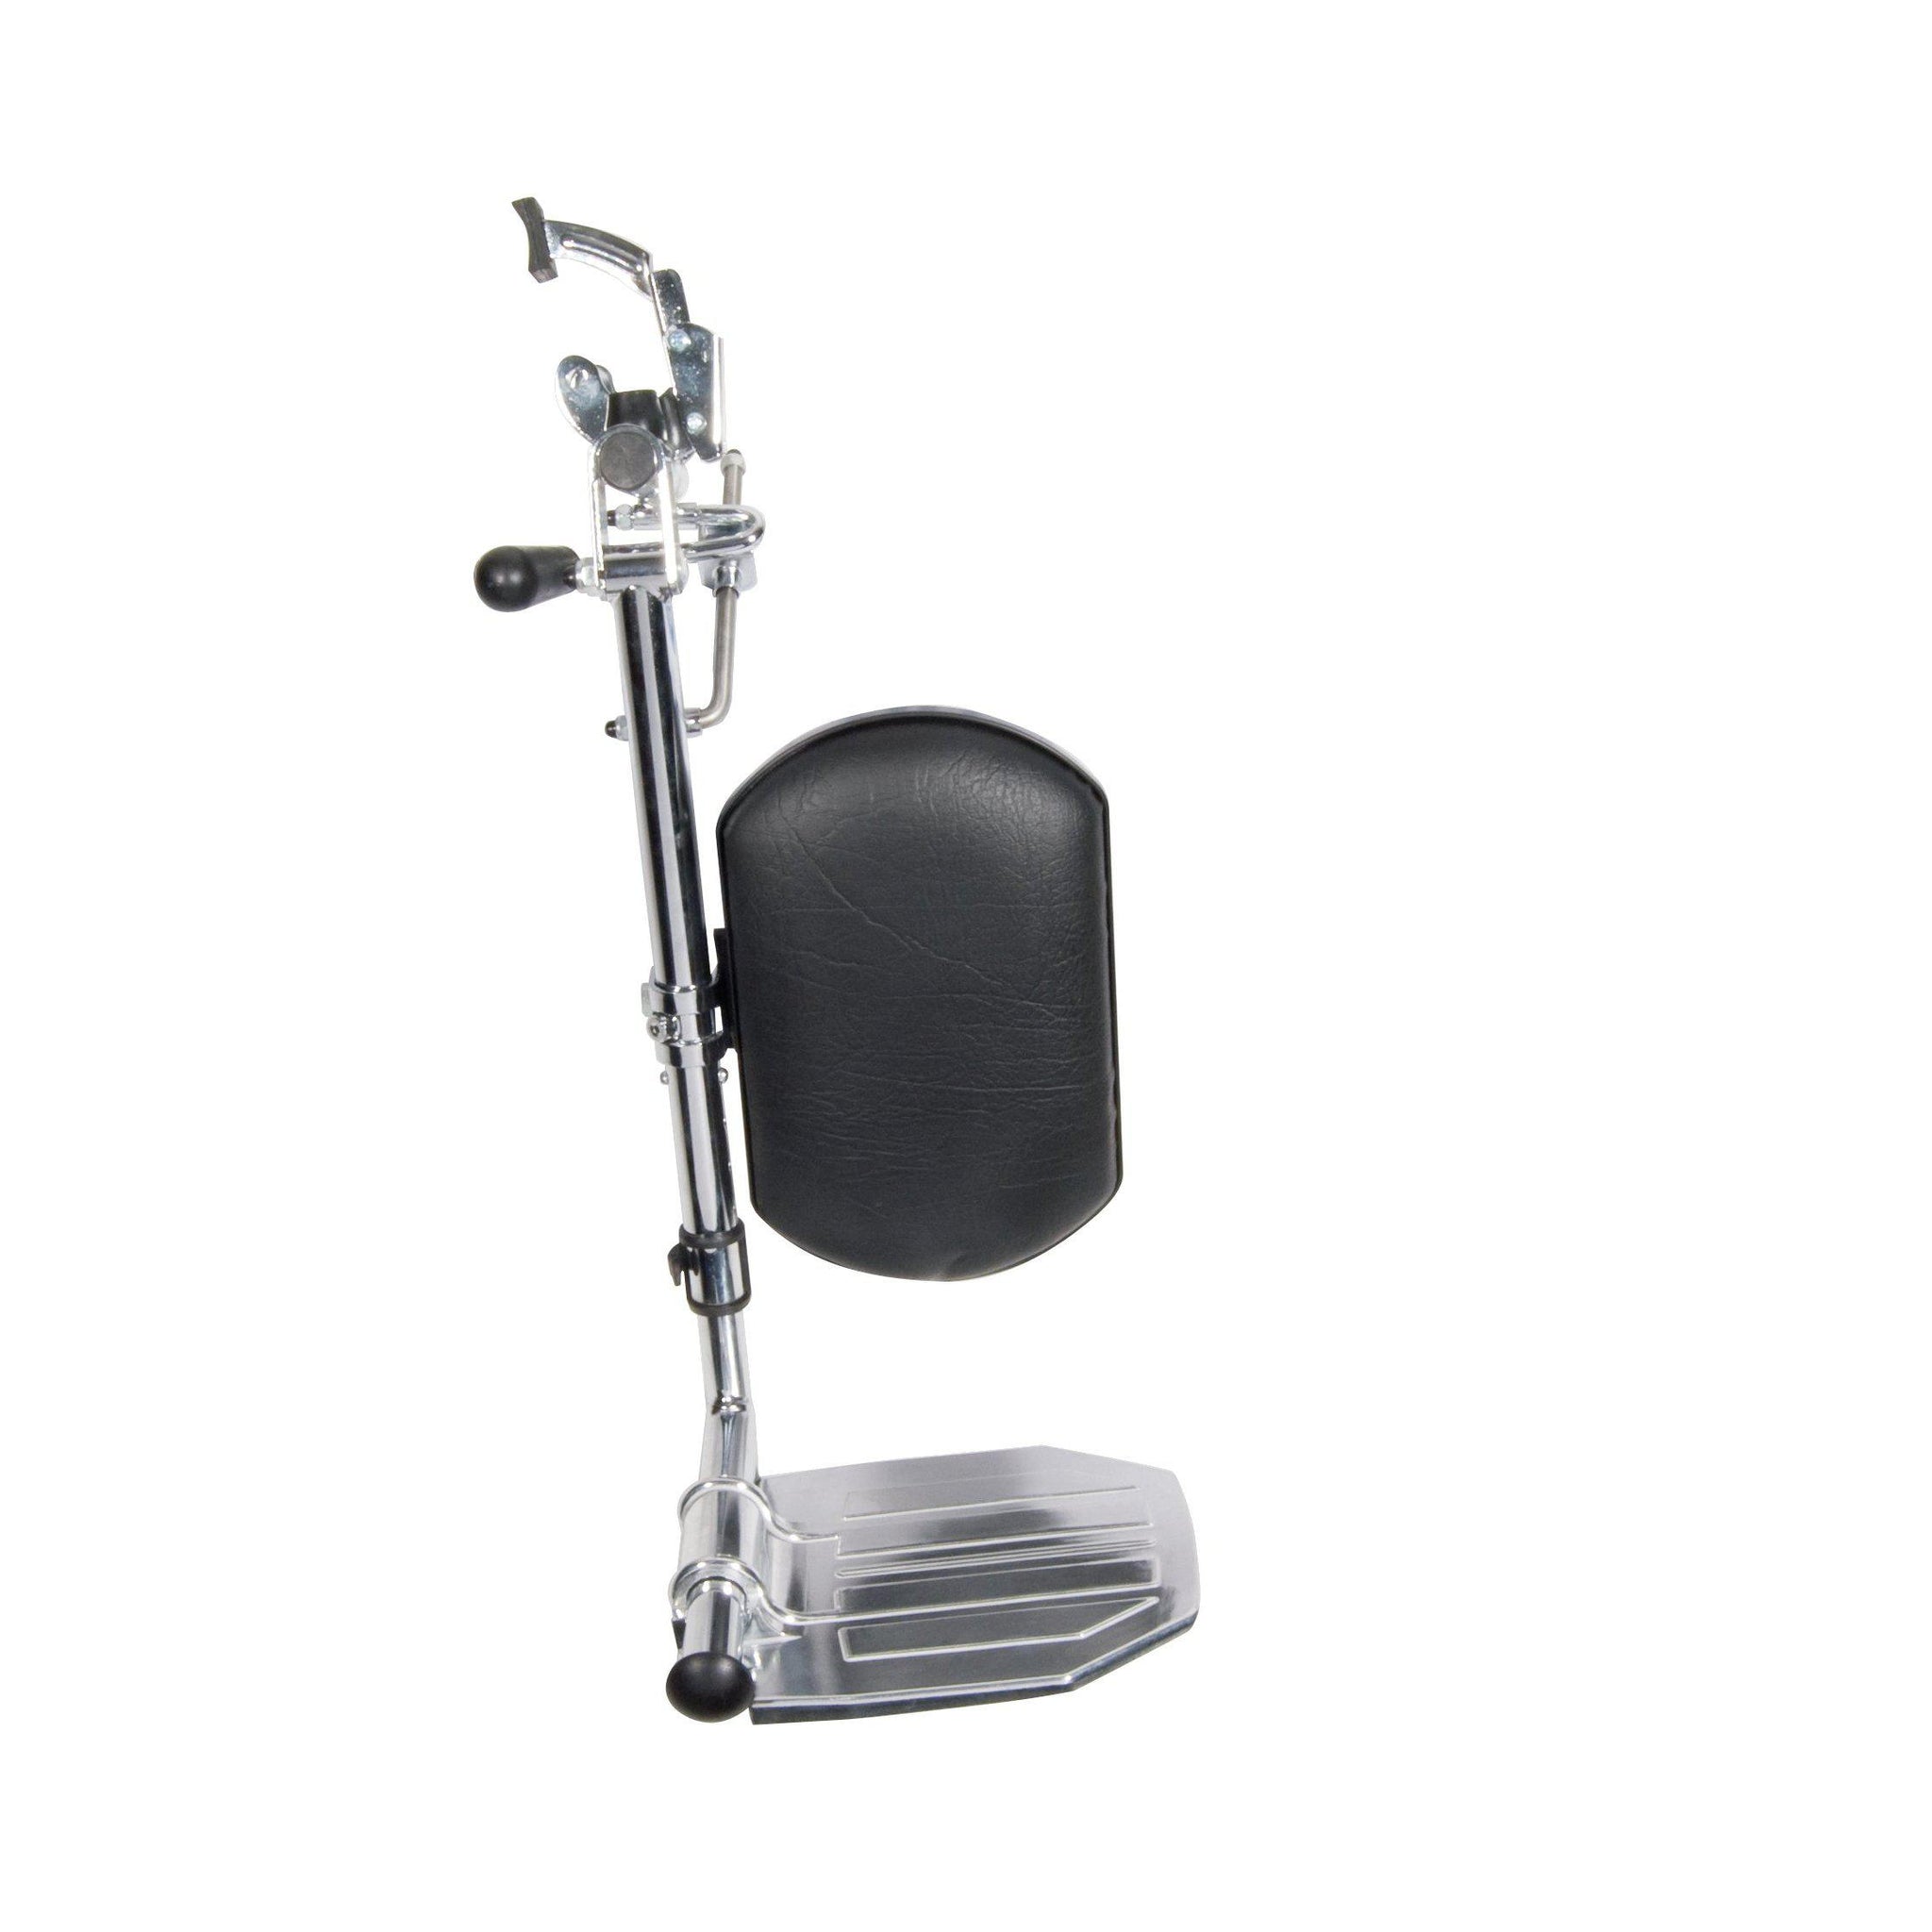 Elevating Legrests for Bariatric Sentra Wheelchairs